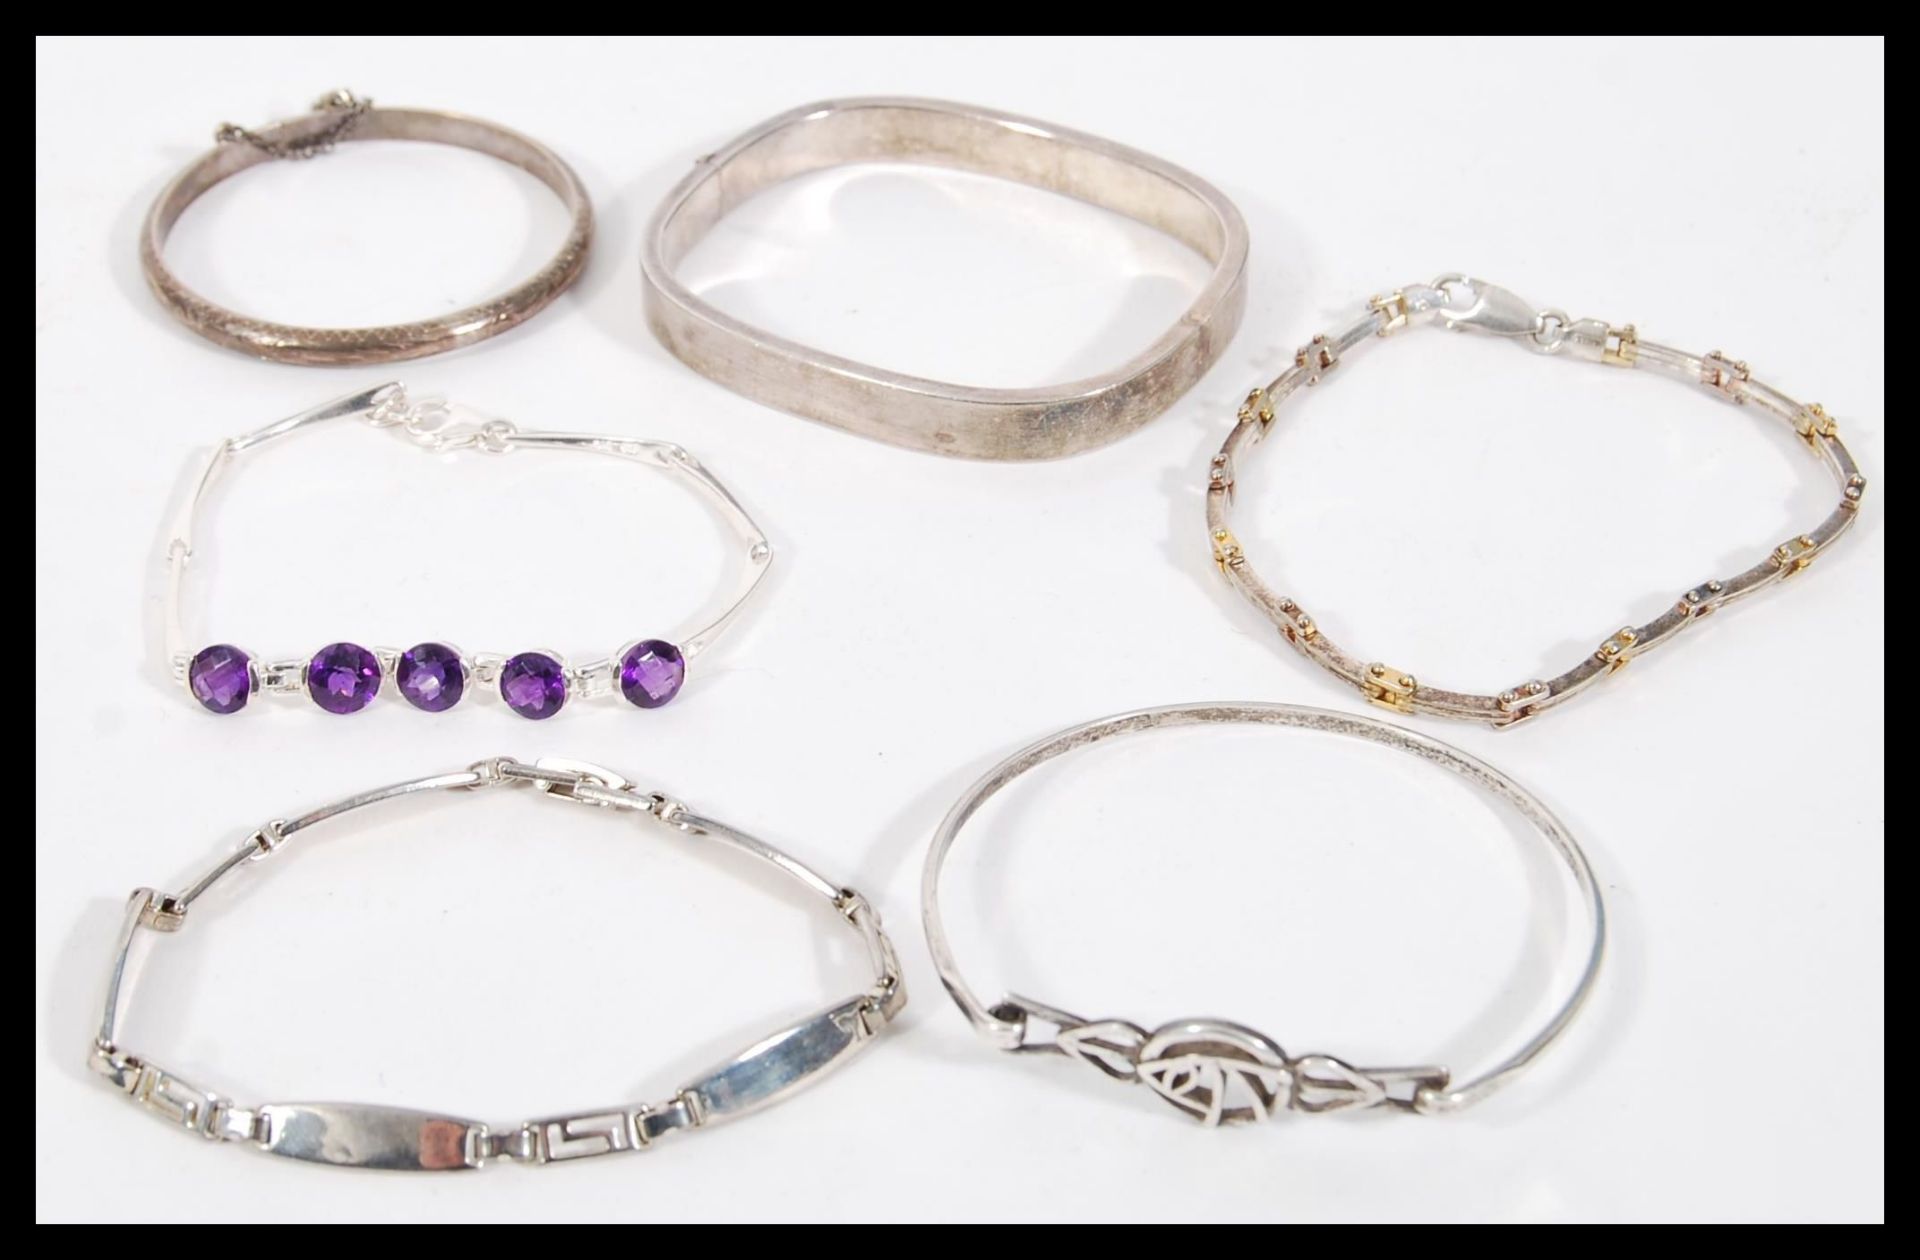 A selection of silver bracelets to include a square bangle with a hinge opening, a child's bangle